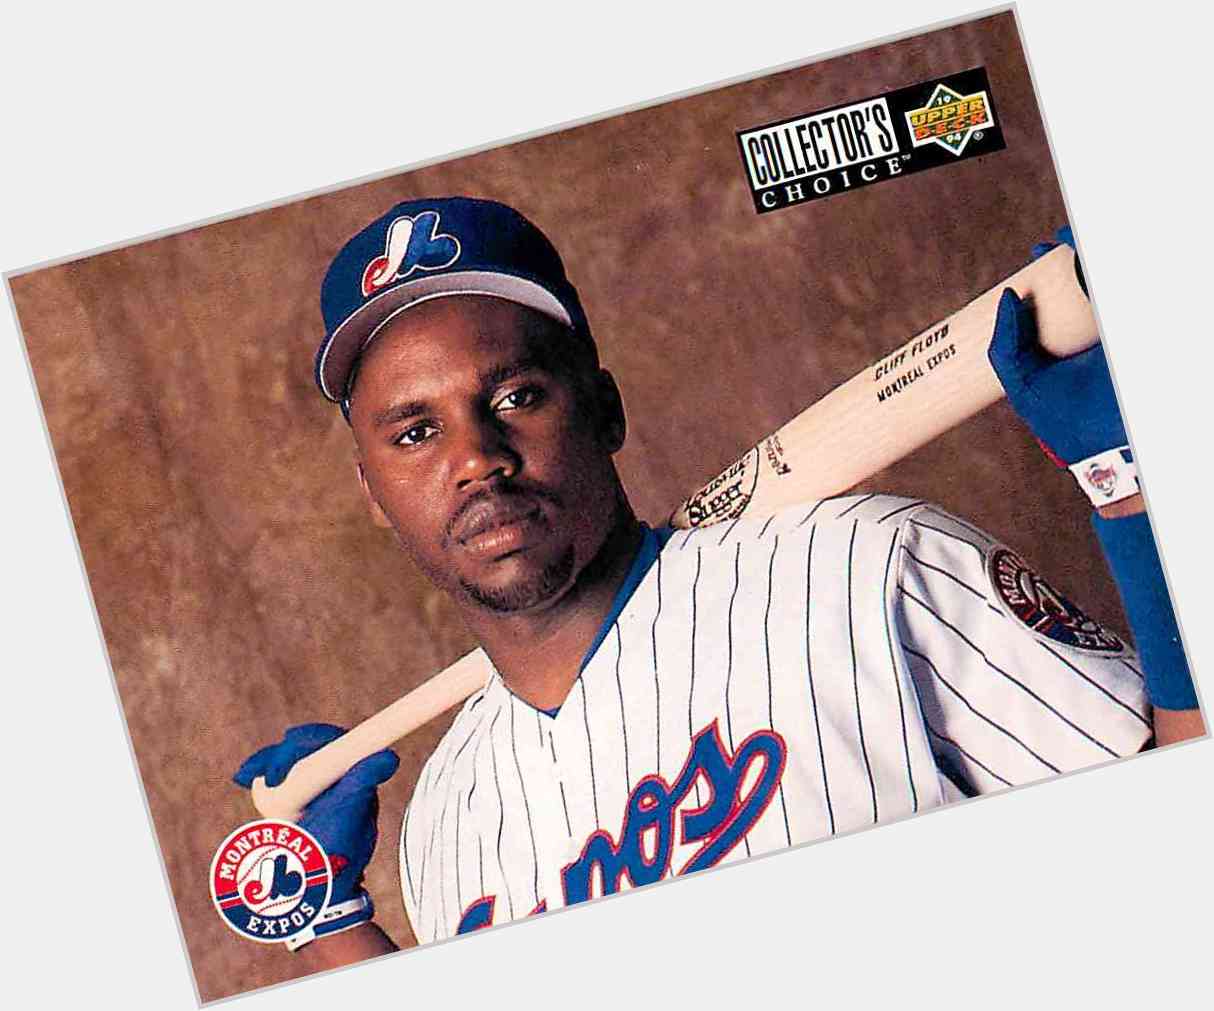 Happy 47th Birthday to former Montreal Expos 1B/OF Cliff Floyd! 